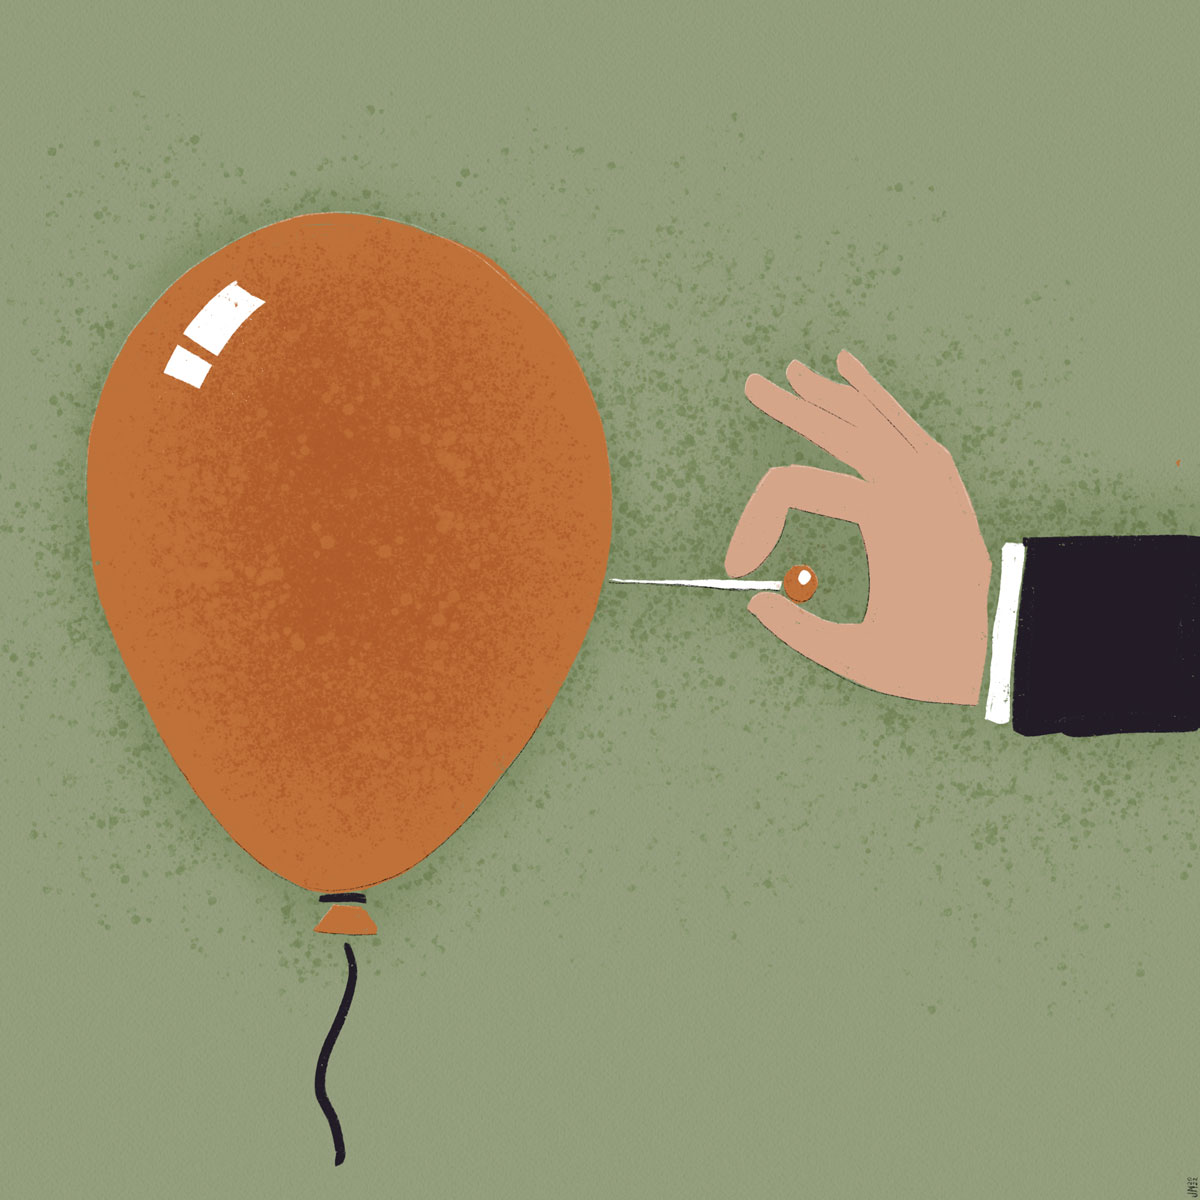 Illustration of pin about to pop balloon